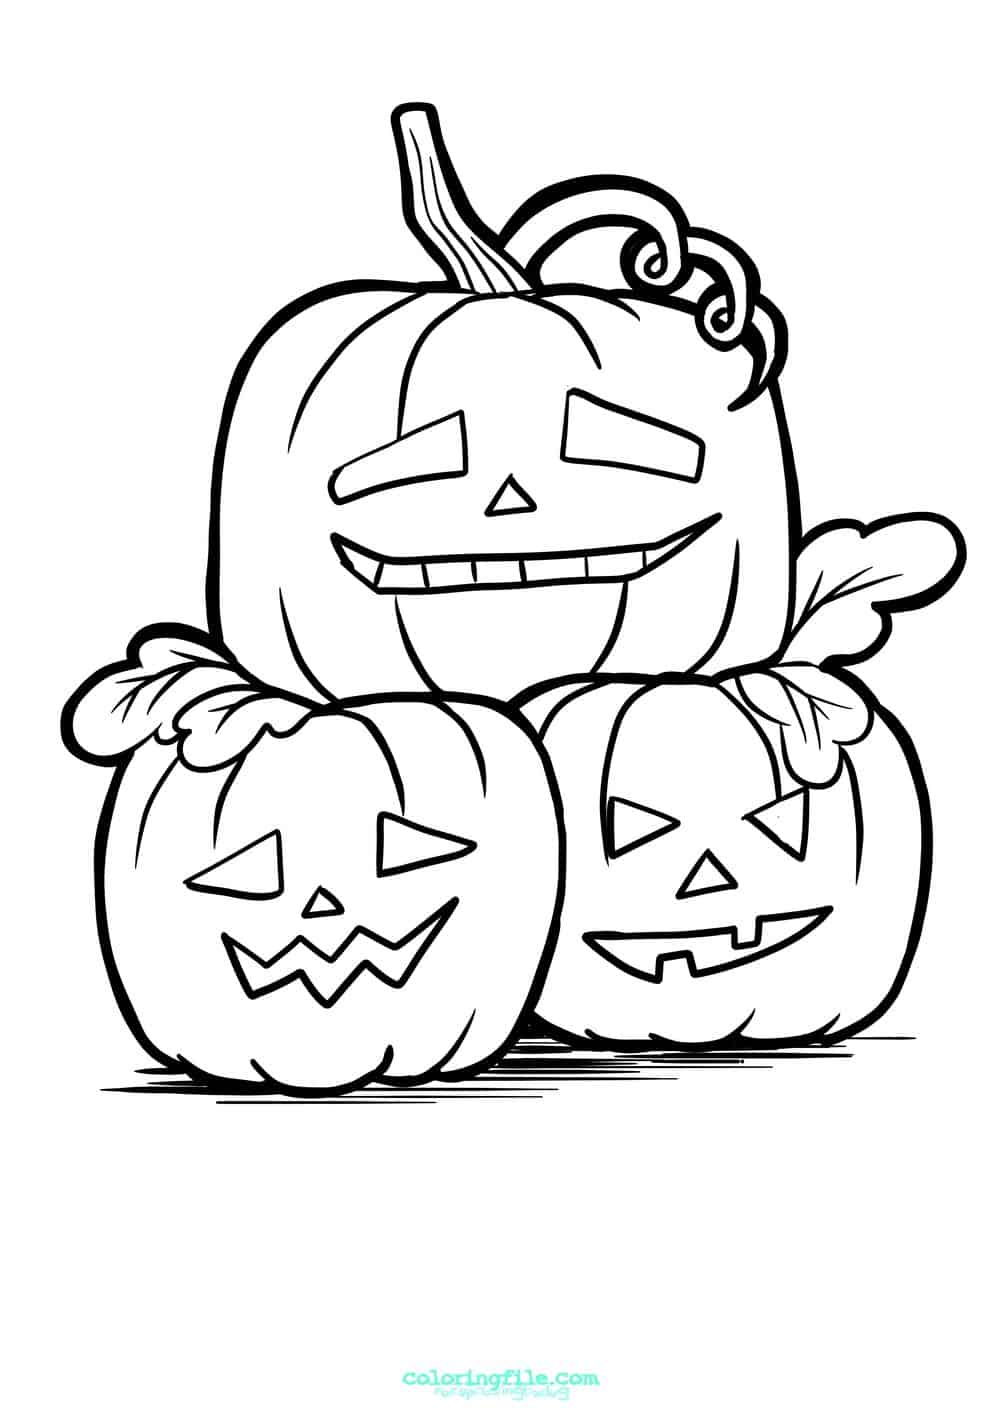 Halloween stacked pumpkin coloring pages